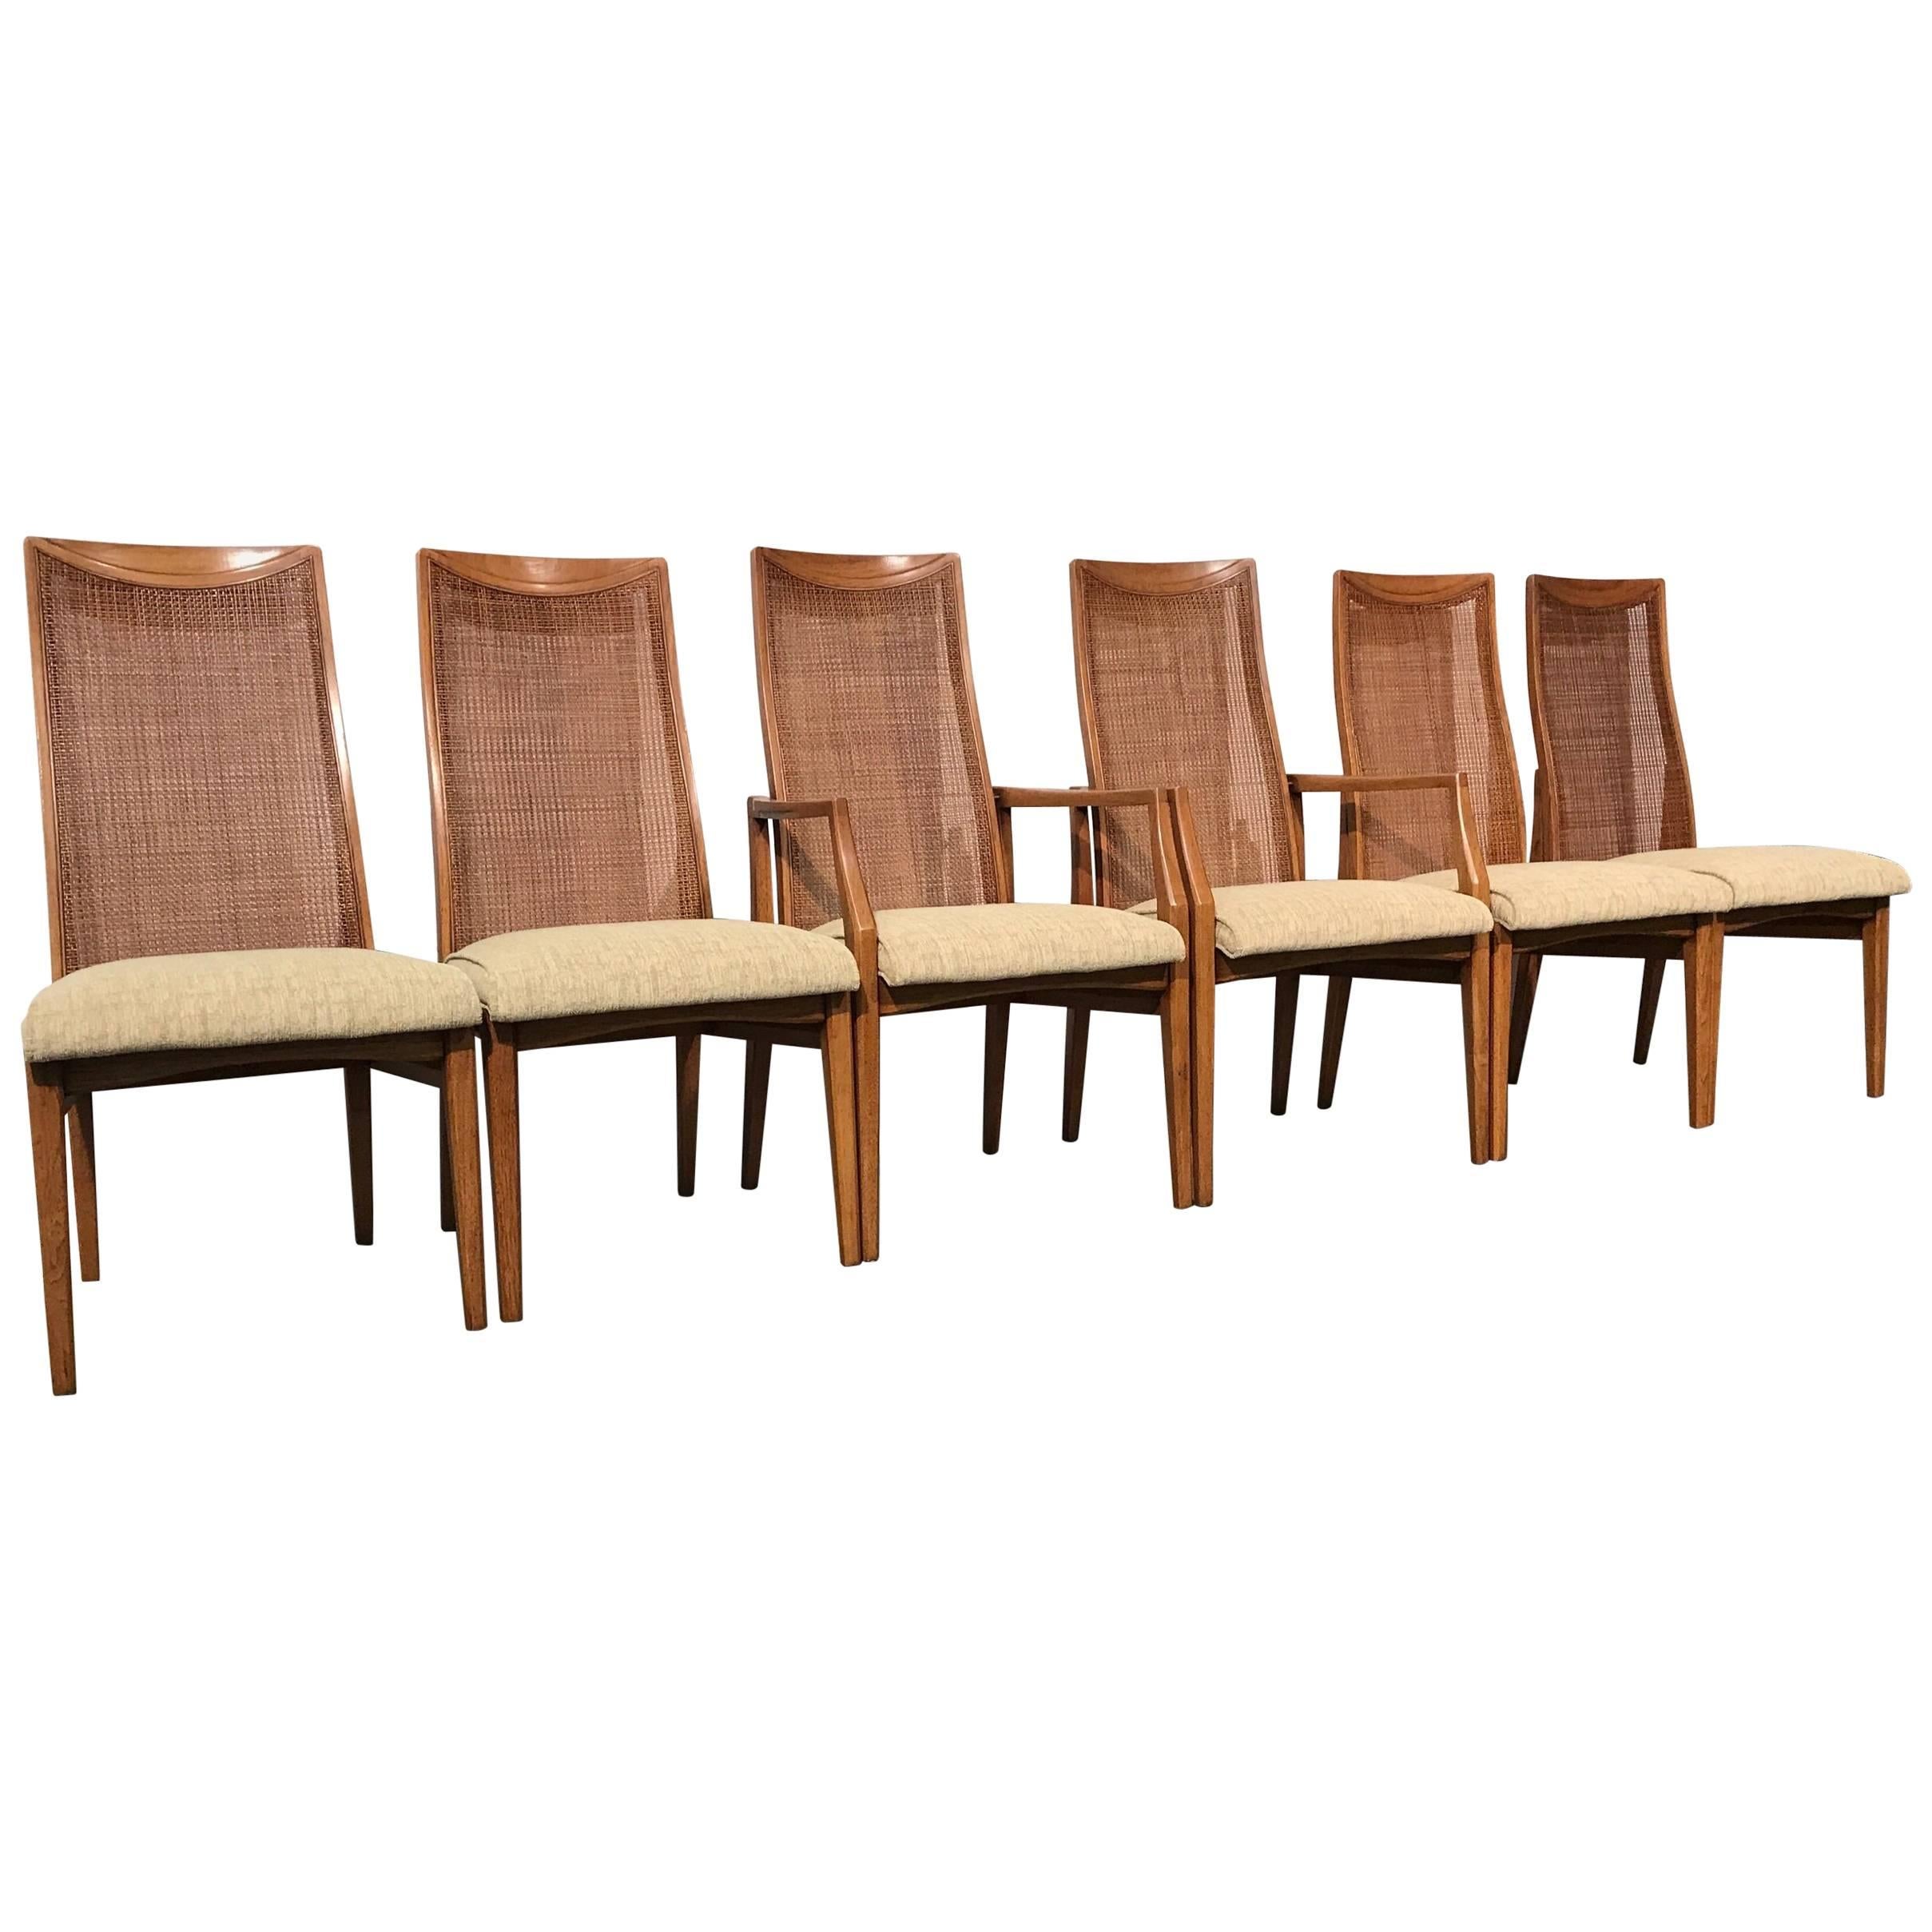 Six Quality Mid-Century Modern Dining Chairs by Heritage Furniture